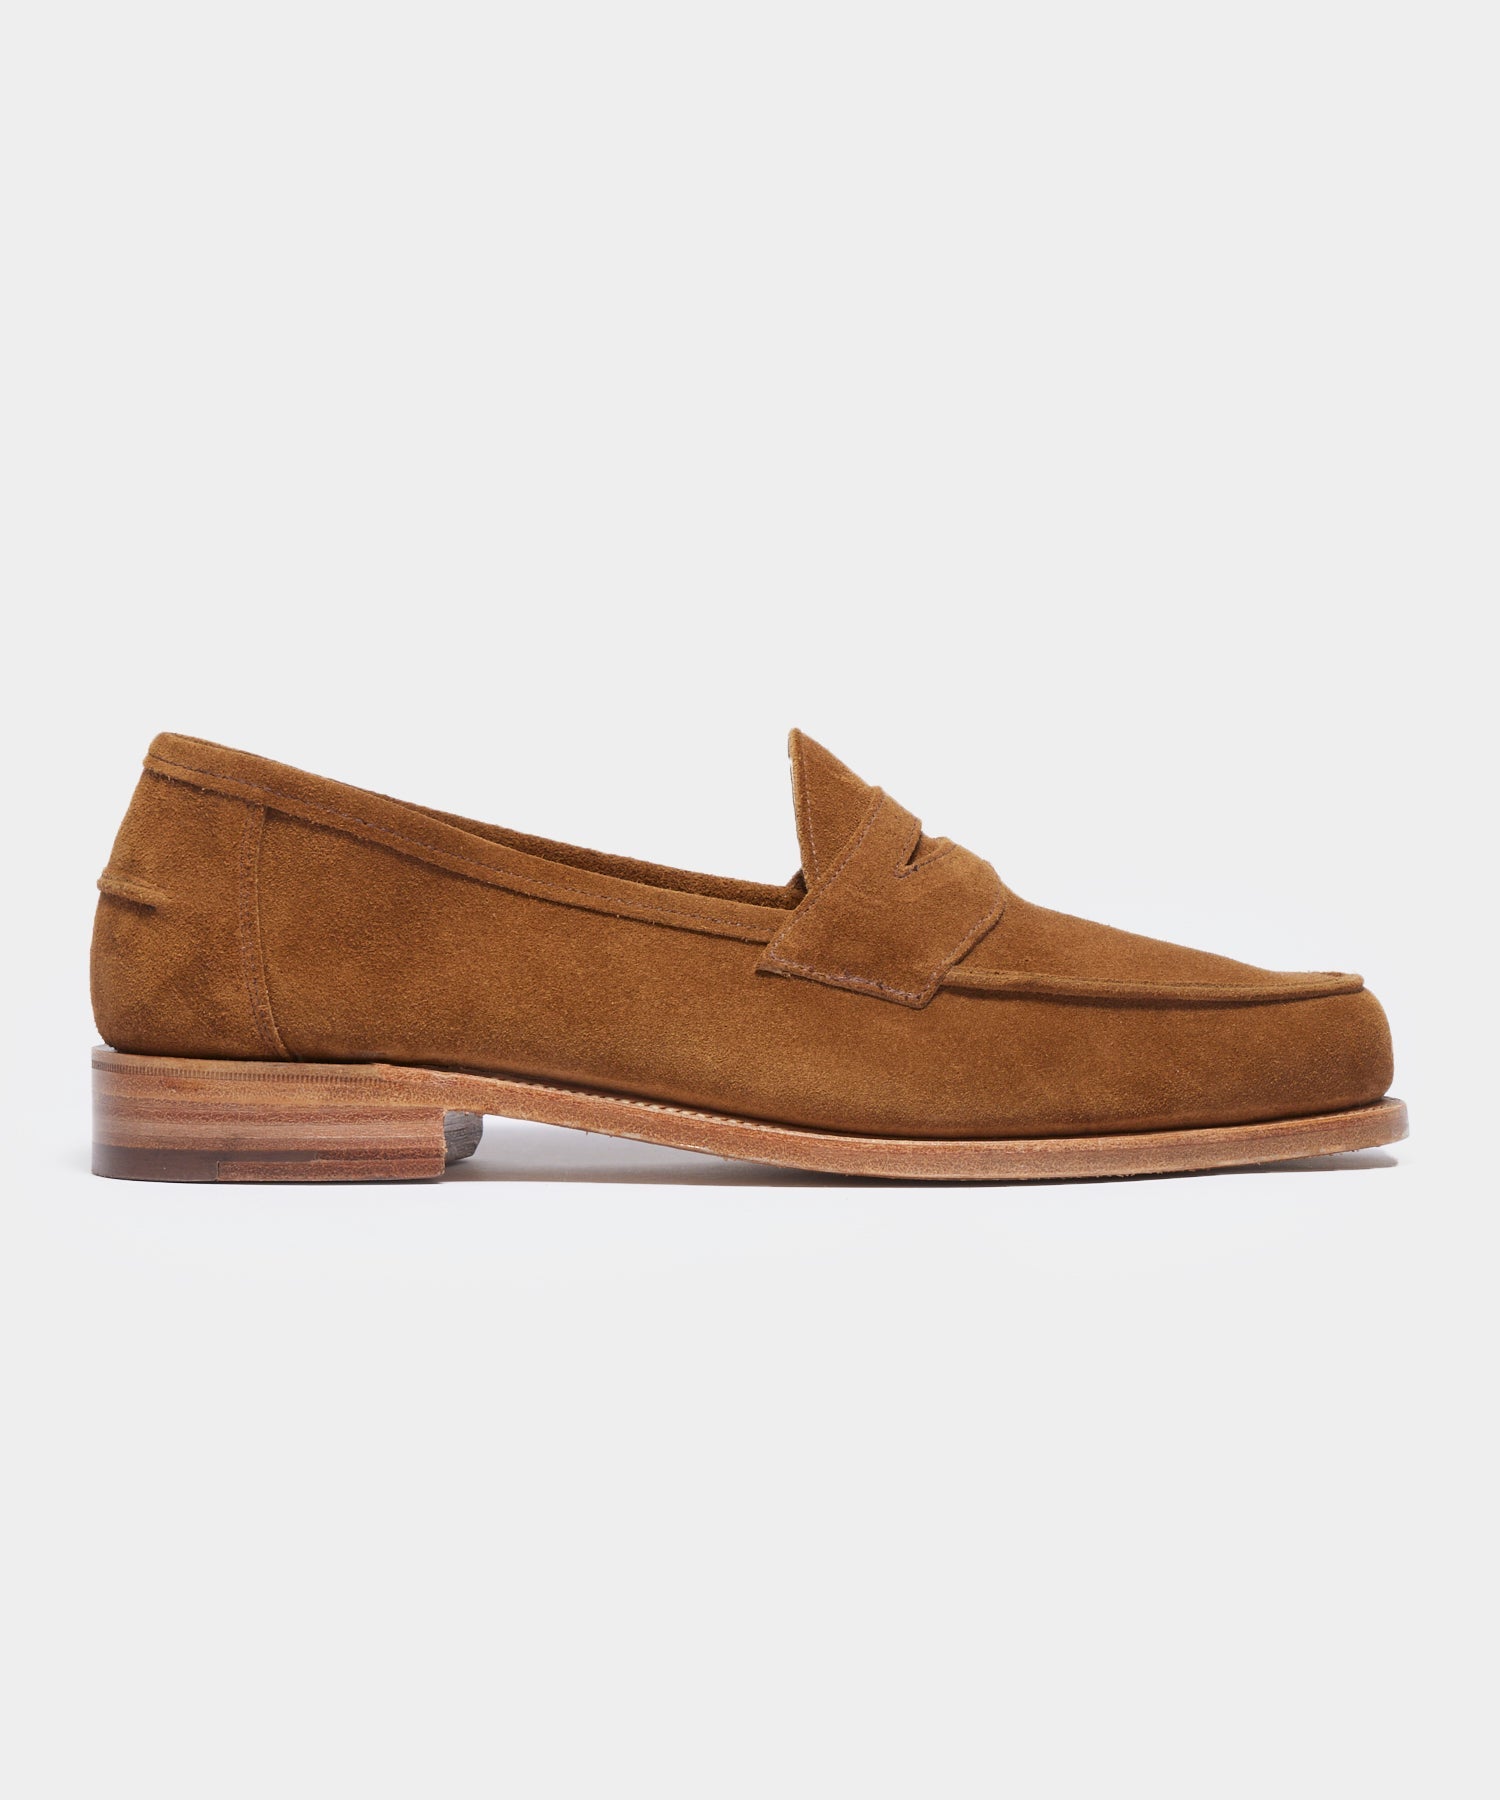 Todd Snyder x Sanders Edwin Loafer in Tobacco Suede